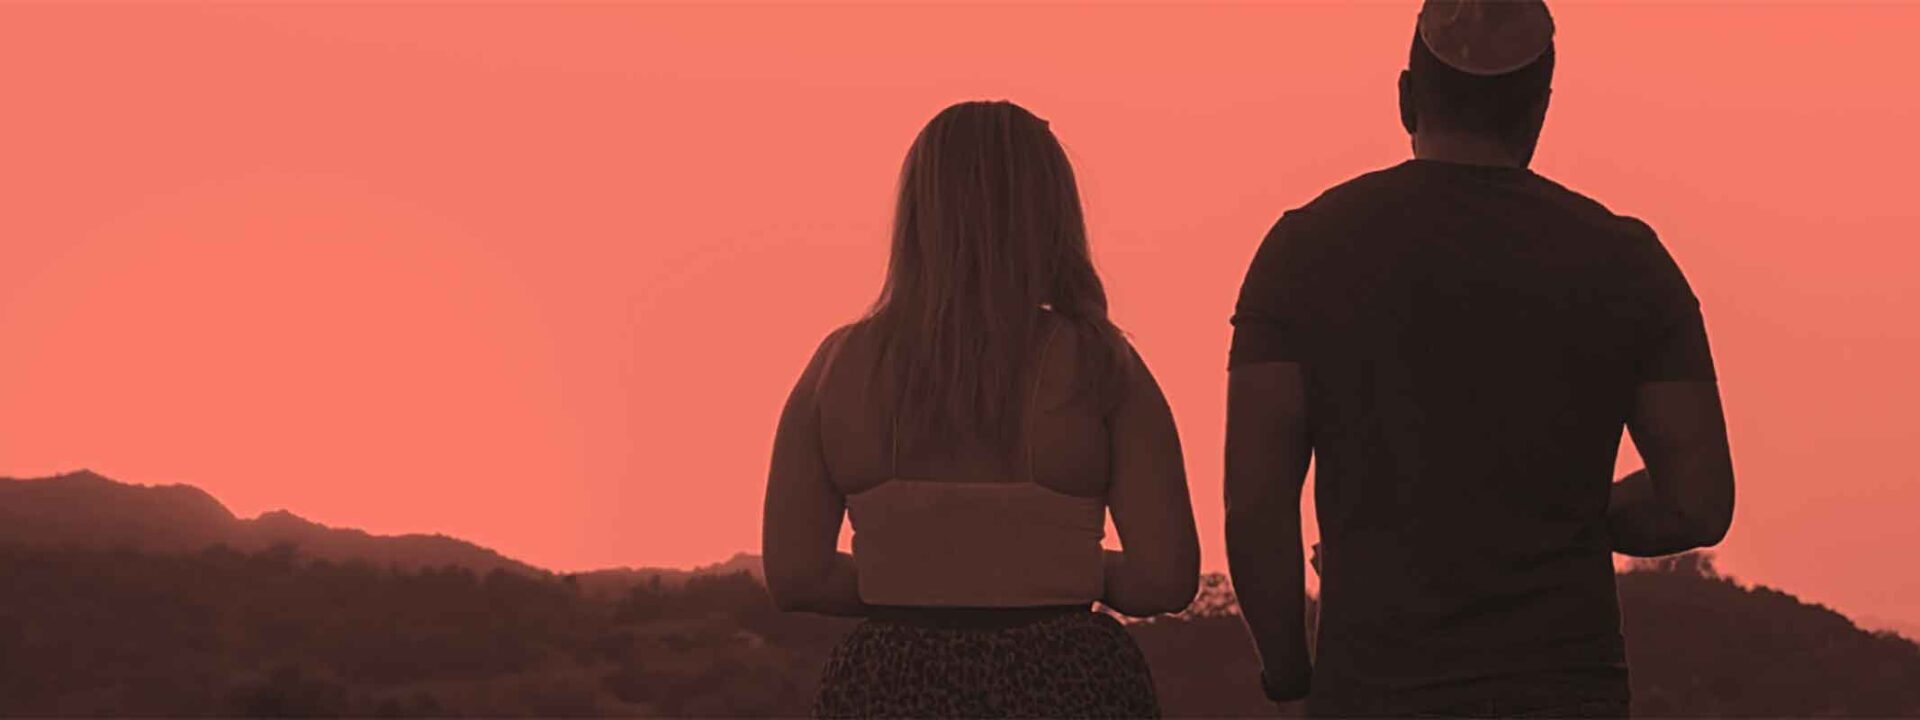 Two individuals are standing side by side against a sunset sky, overlooking a hilly landscape. The image captures a serene, warm atmosphere.